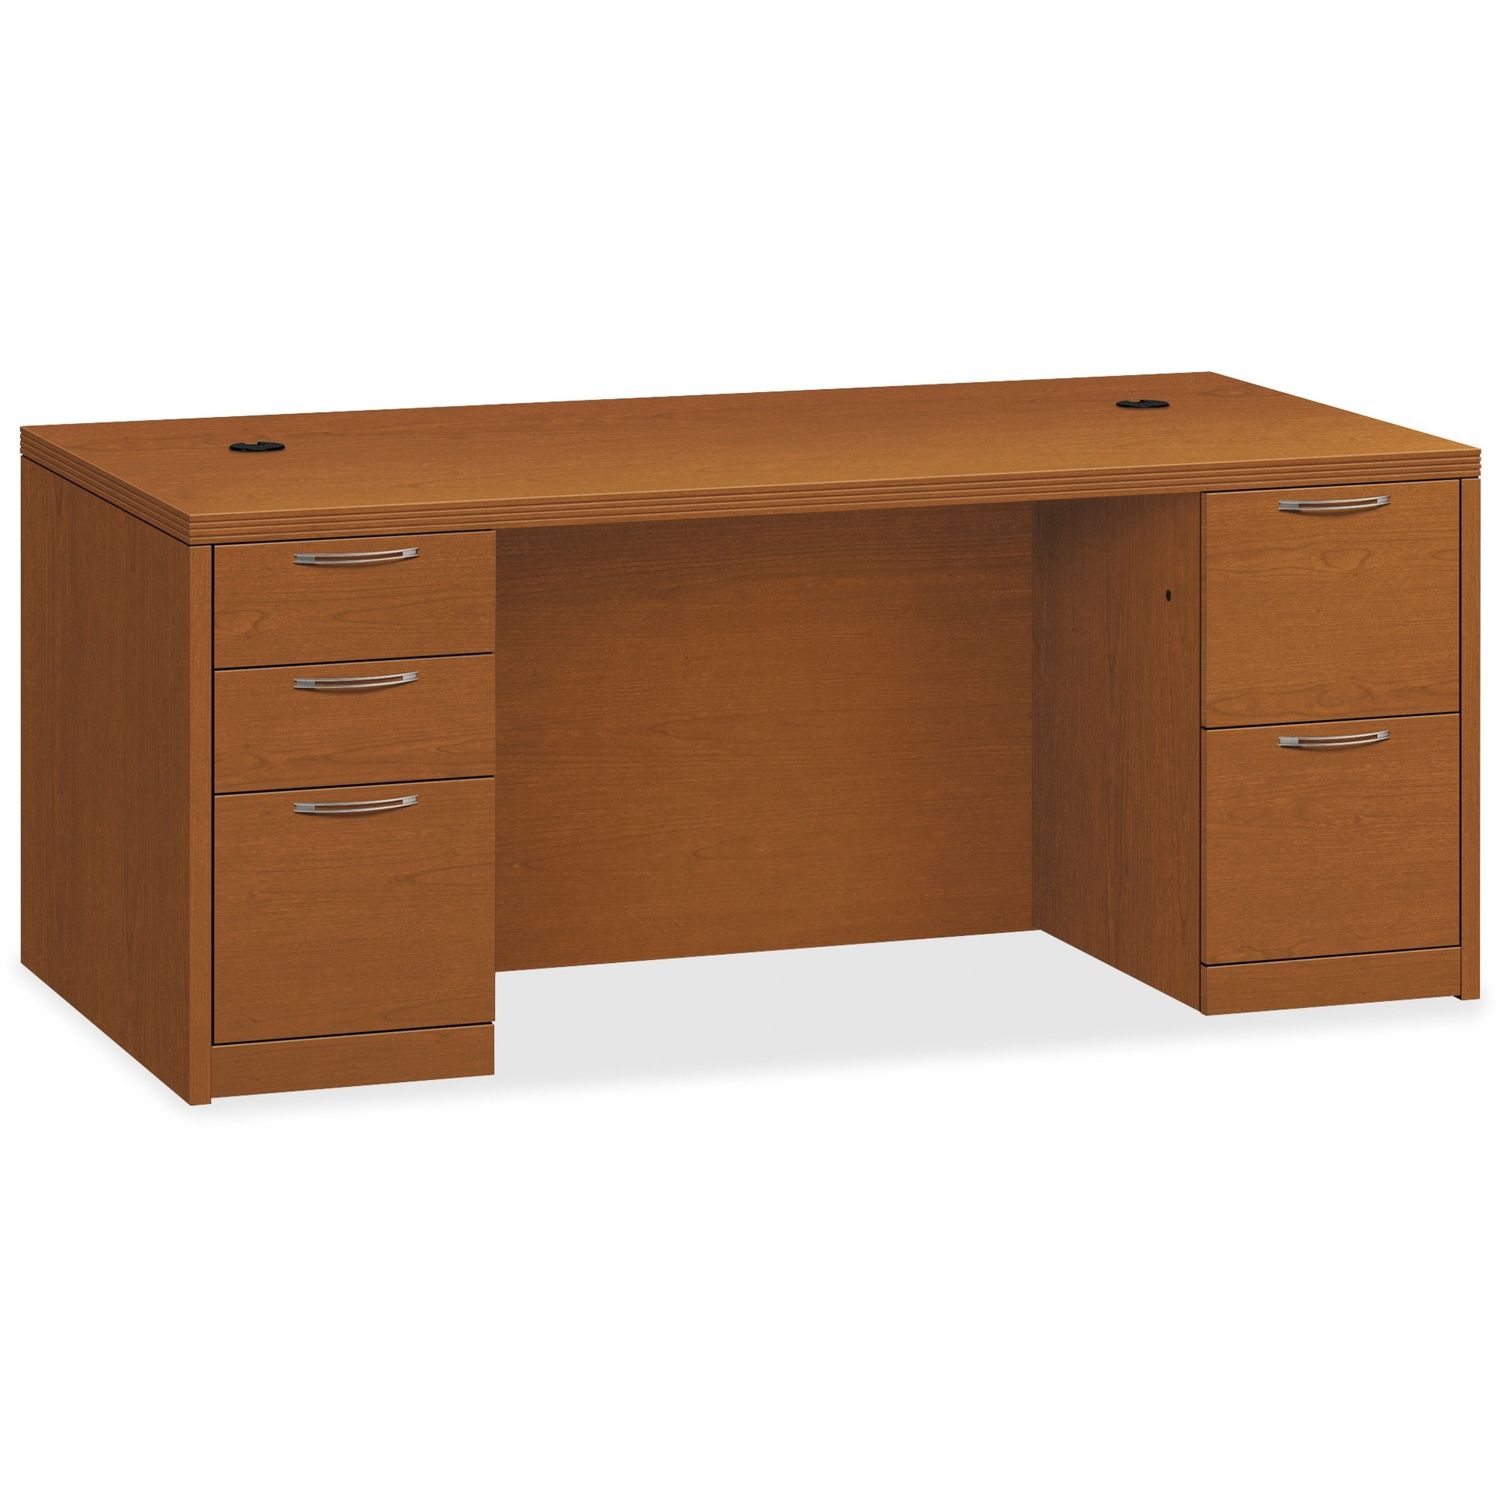 Valido Double Pedestal Desk 72"W - 5-Drawer, 72" x 36" x 29.5" x 1.5", 5 x Box Drawer(s), File Drawer(s), Double Pedestal on Left/Right Side, Ribbon Edge, Material: Particleboard